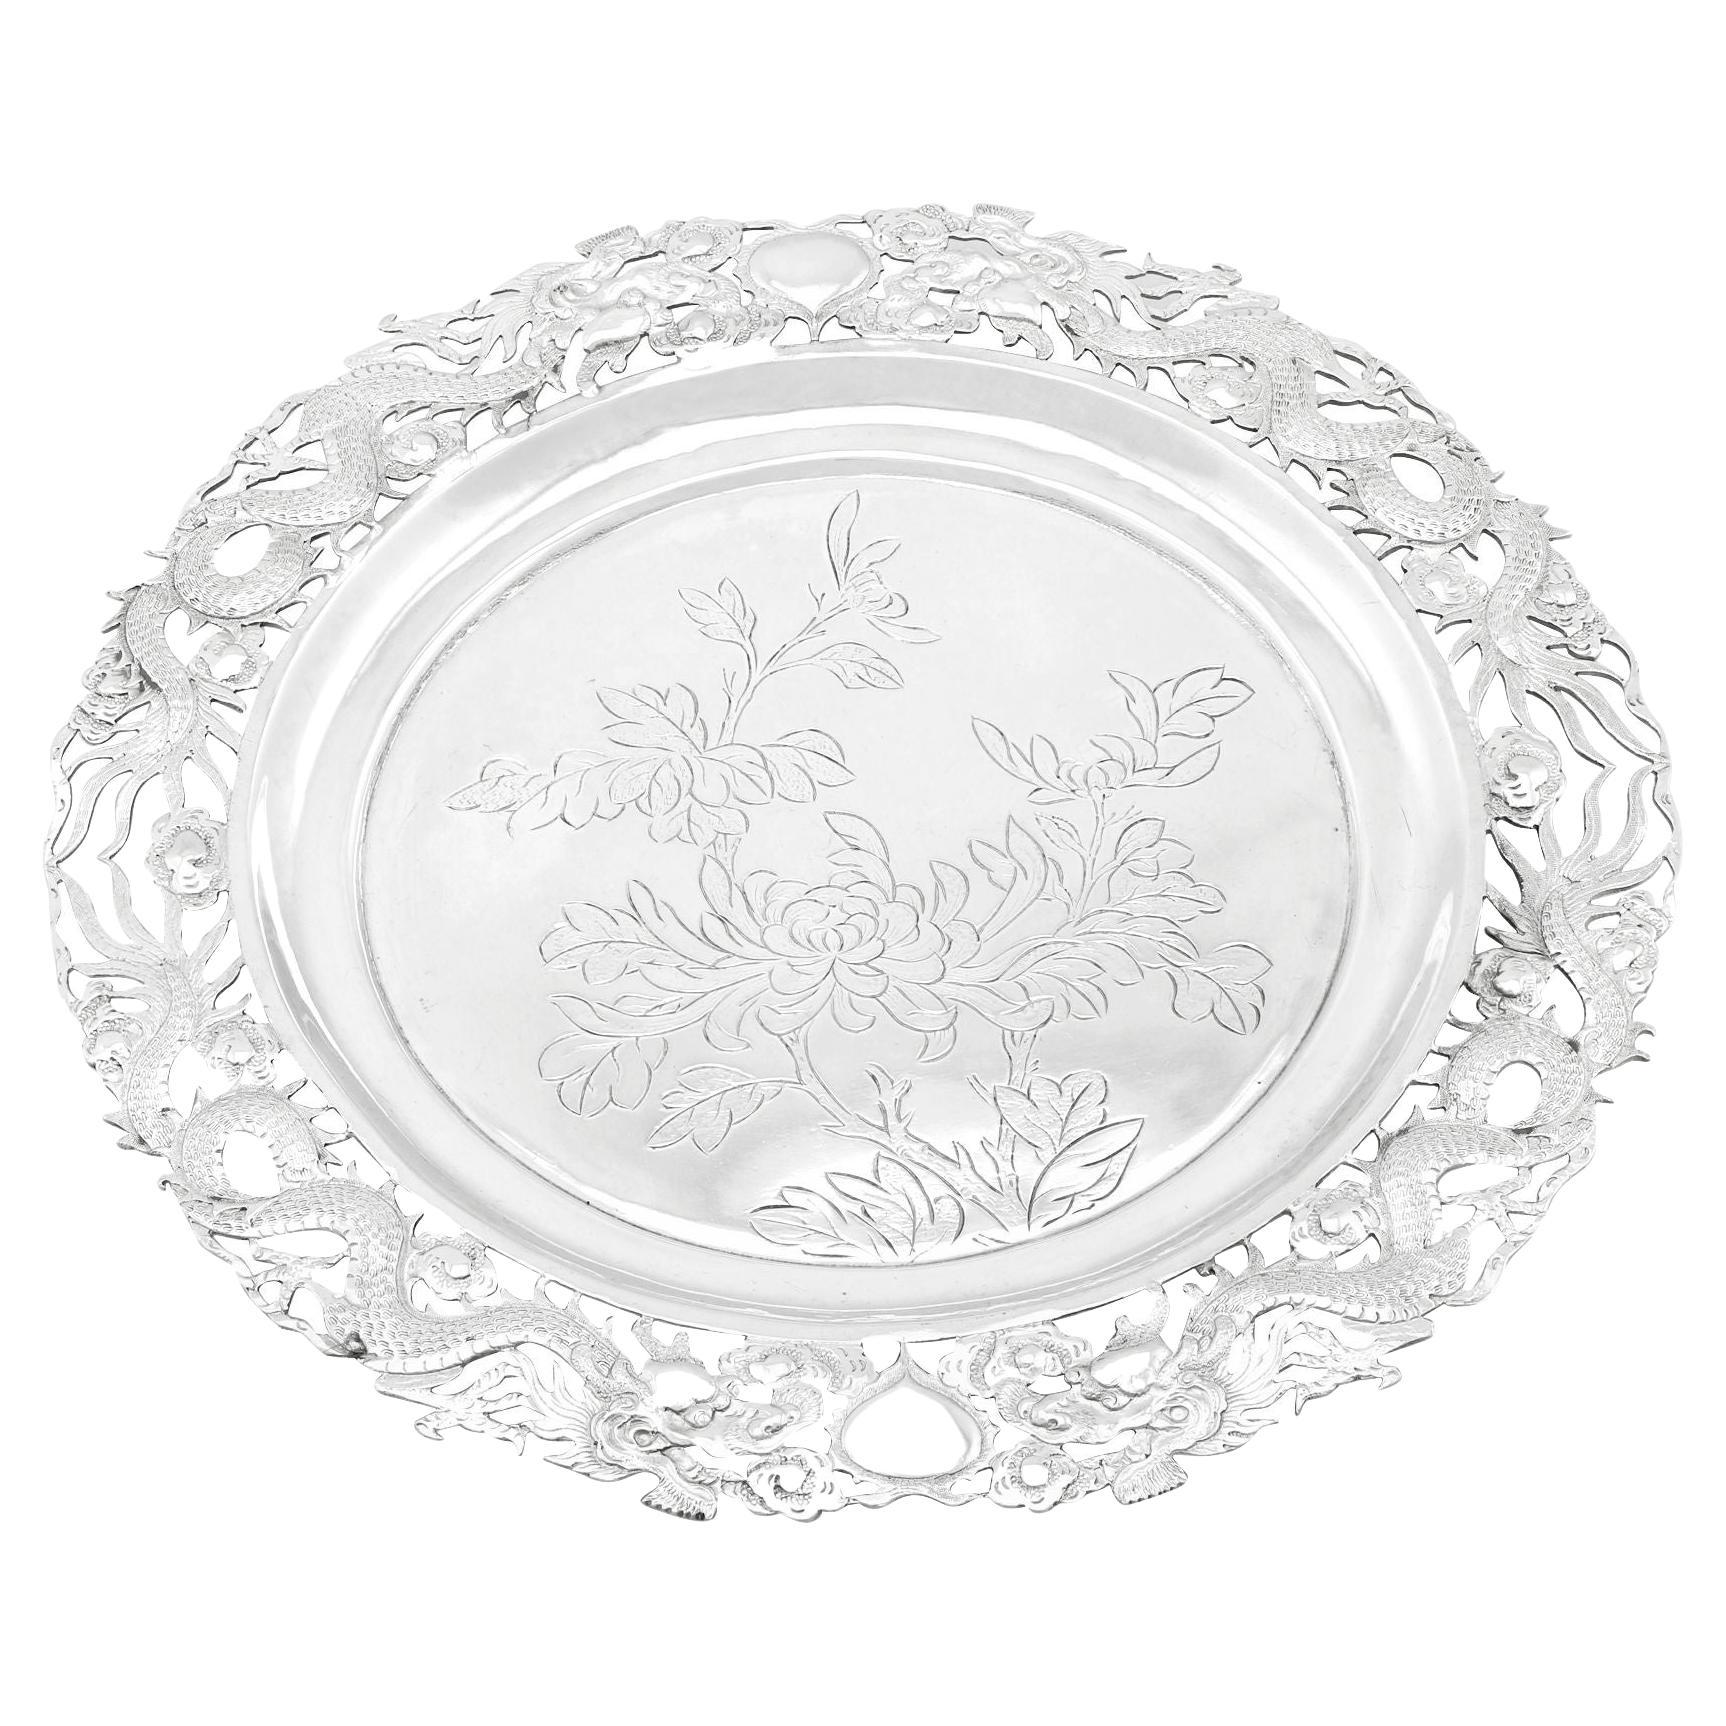 20th Century Chinese Export Silver Salver by Wing Fat